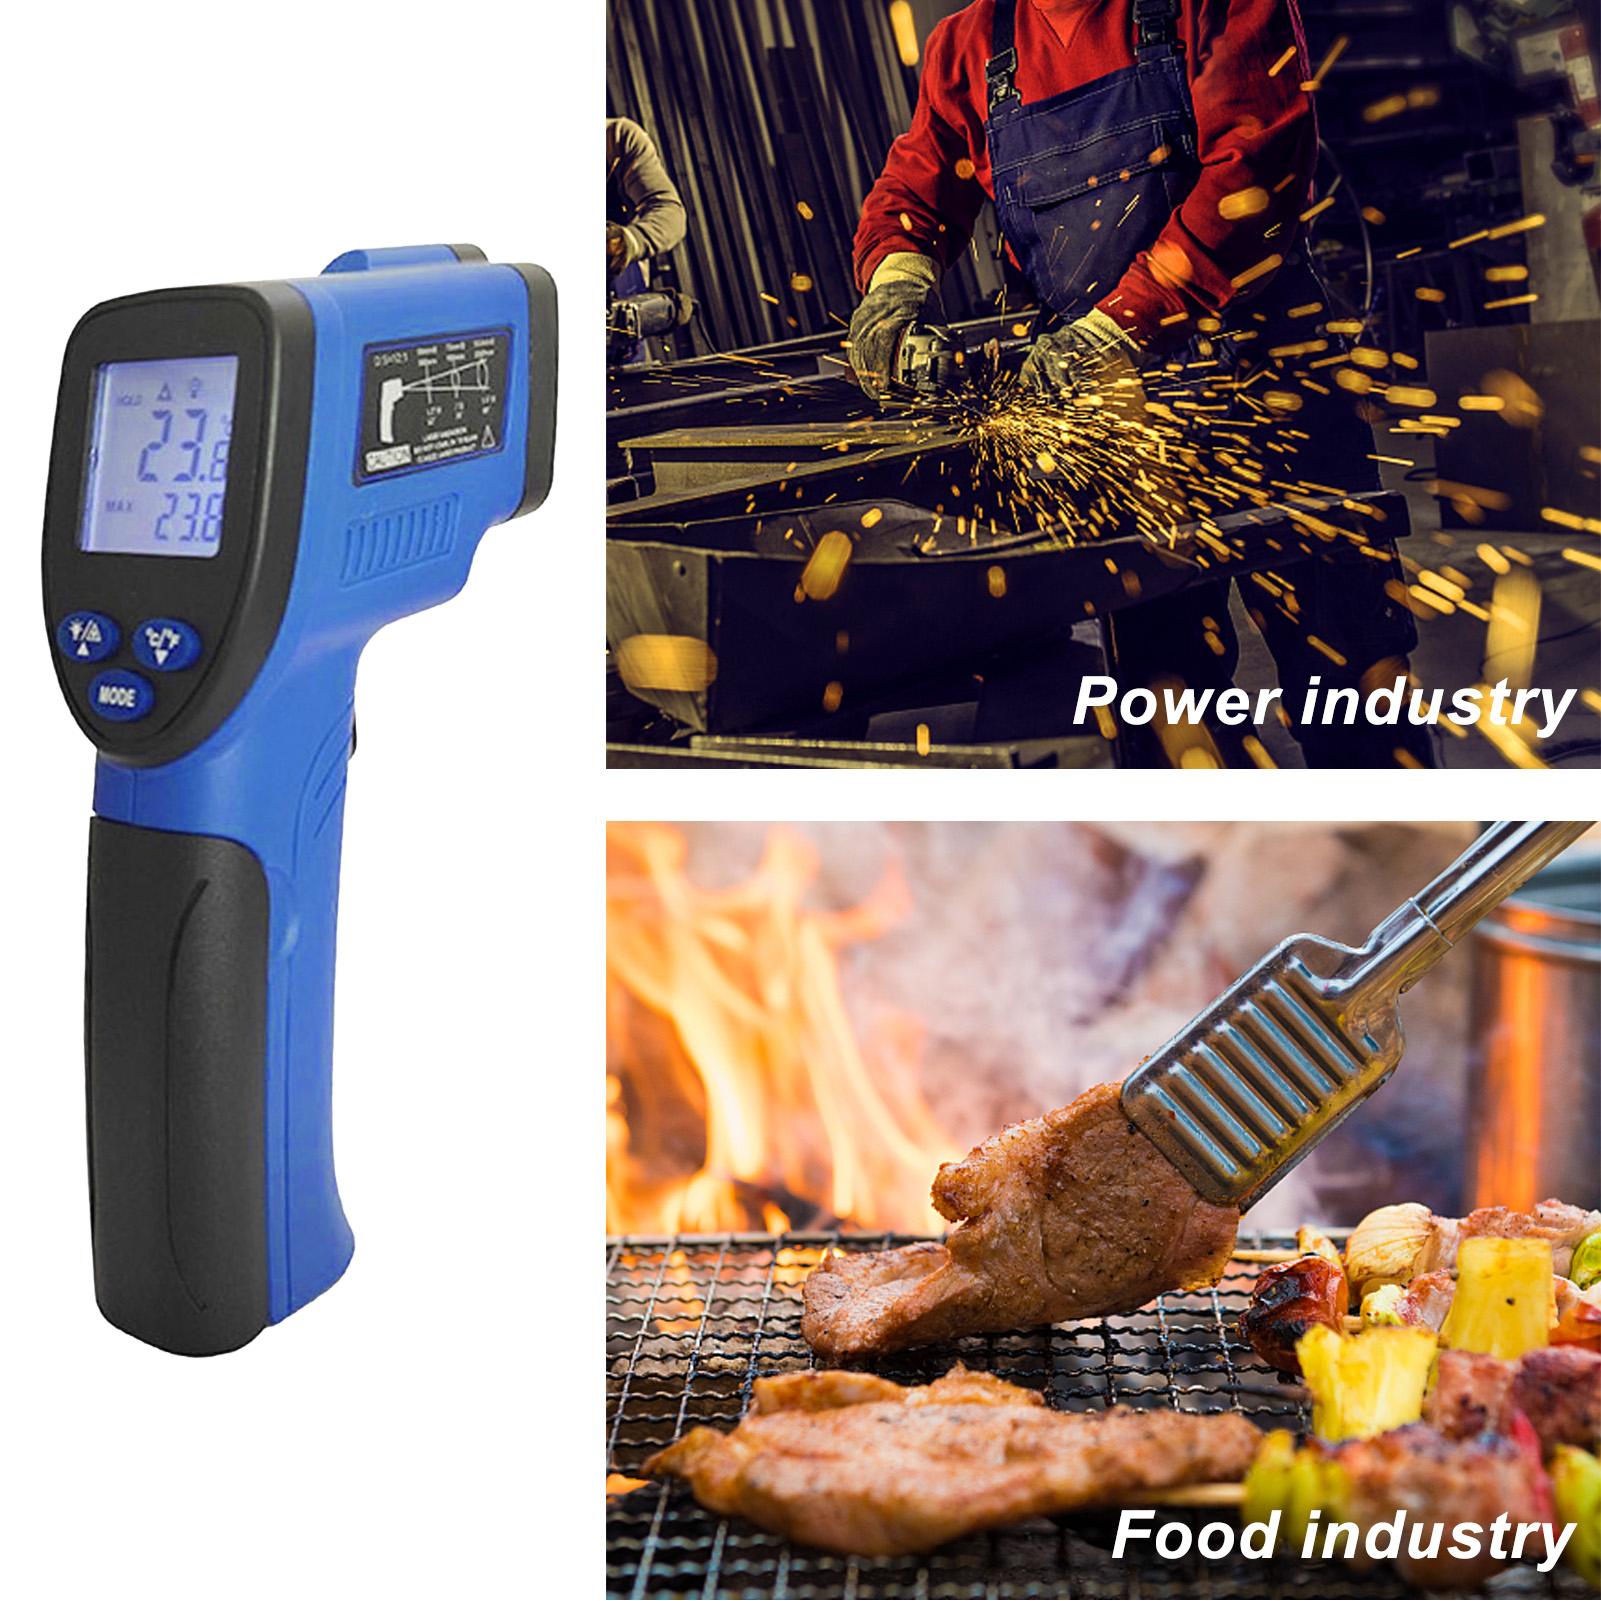 Infrared Temperature Measuring Gun Digital Display Industrial Thermometer No Touch Gun Thermometer with Backlight ℃/ ℉ Switchable -50~550℃